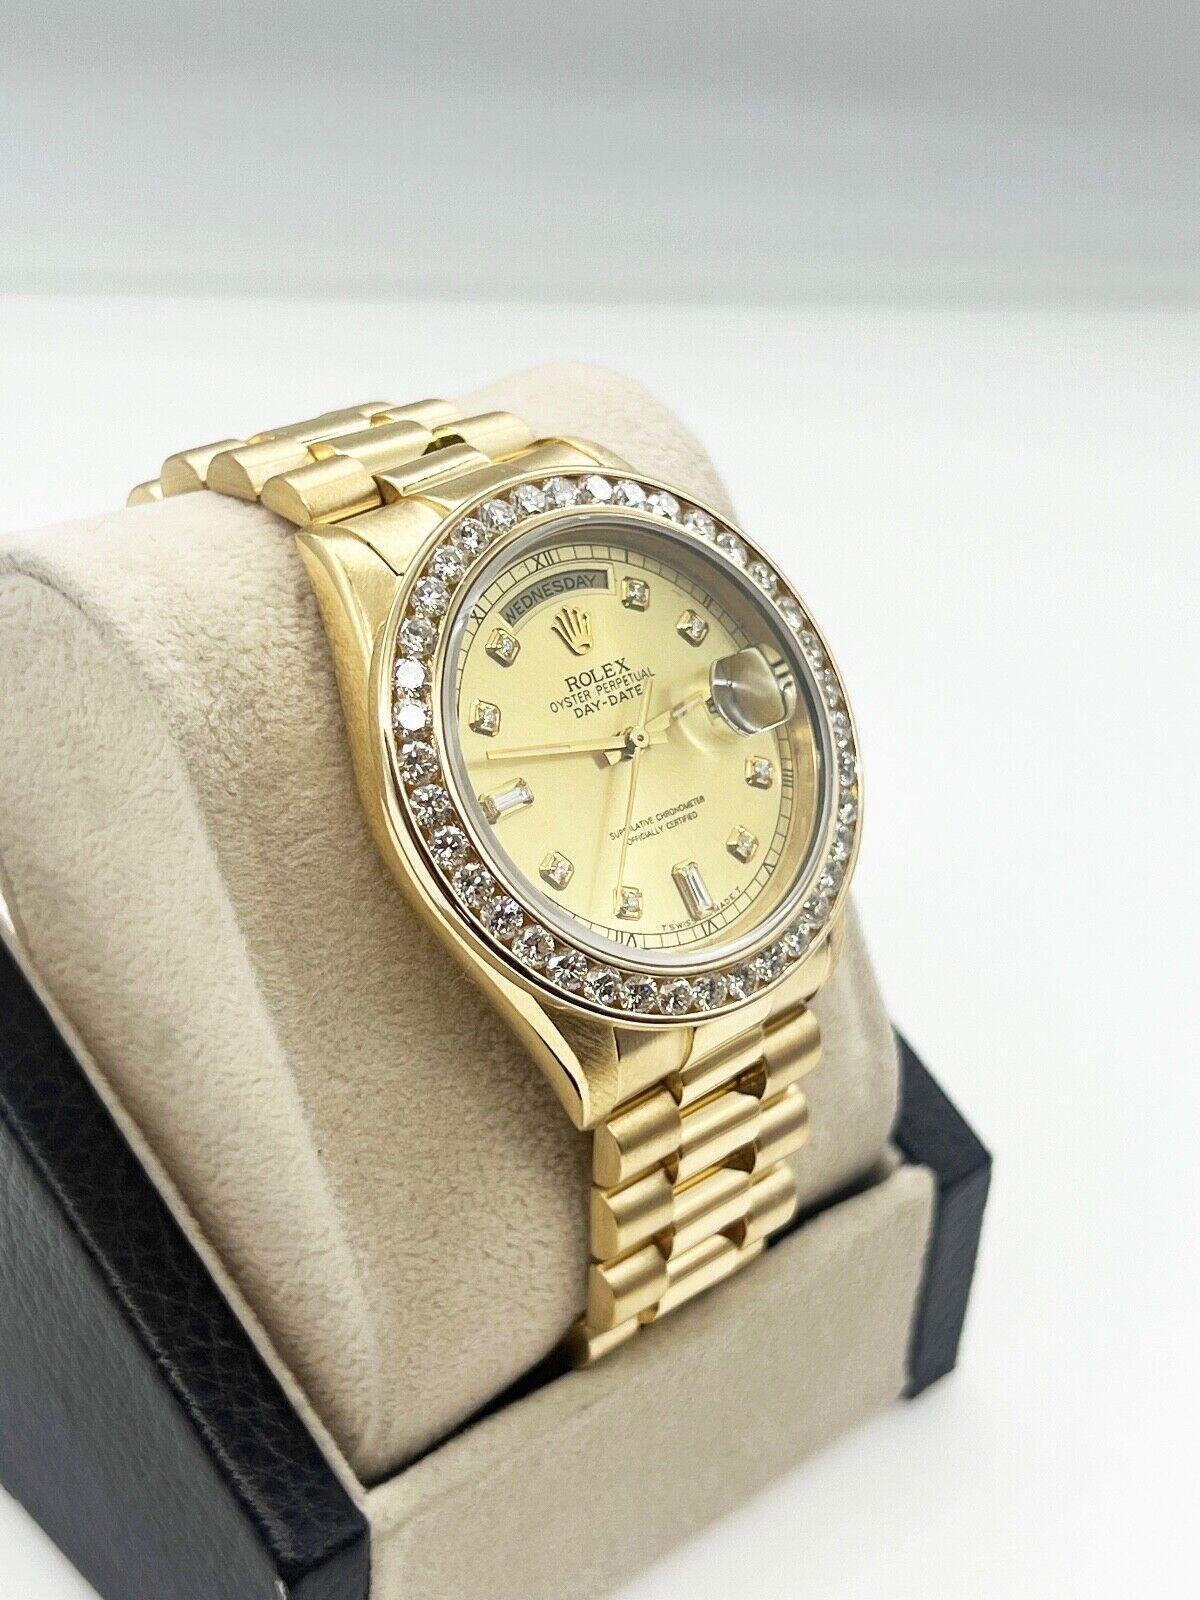 Rolex 18238 President Day Date Champagne Diamond Dial Diamond Bezel 18K Gold In Good Condition For Sale In San Diego, CA